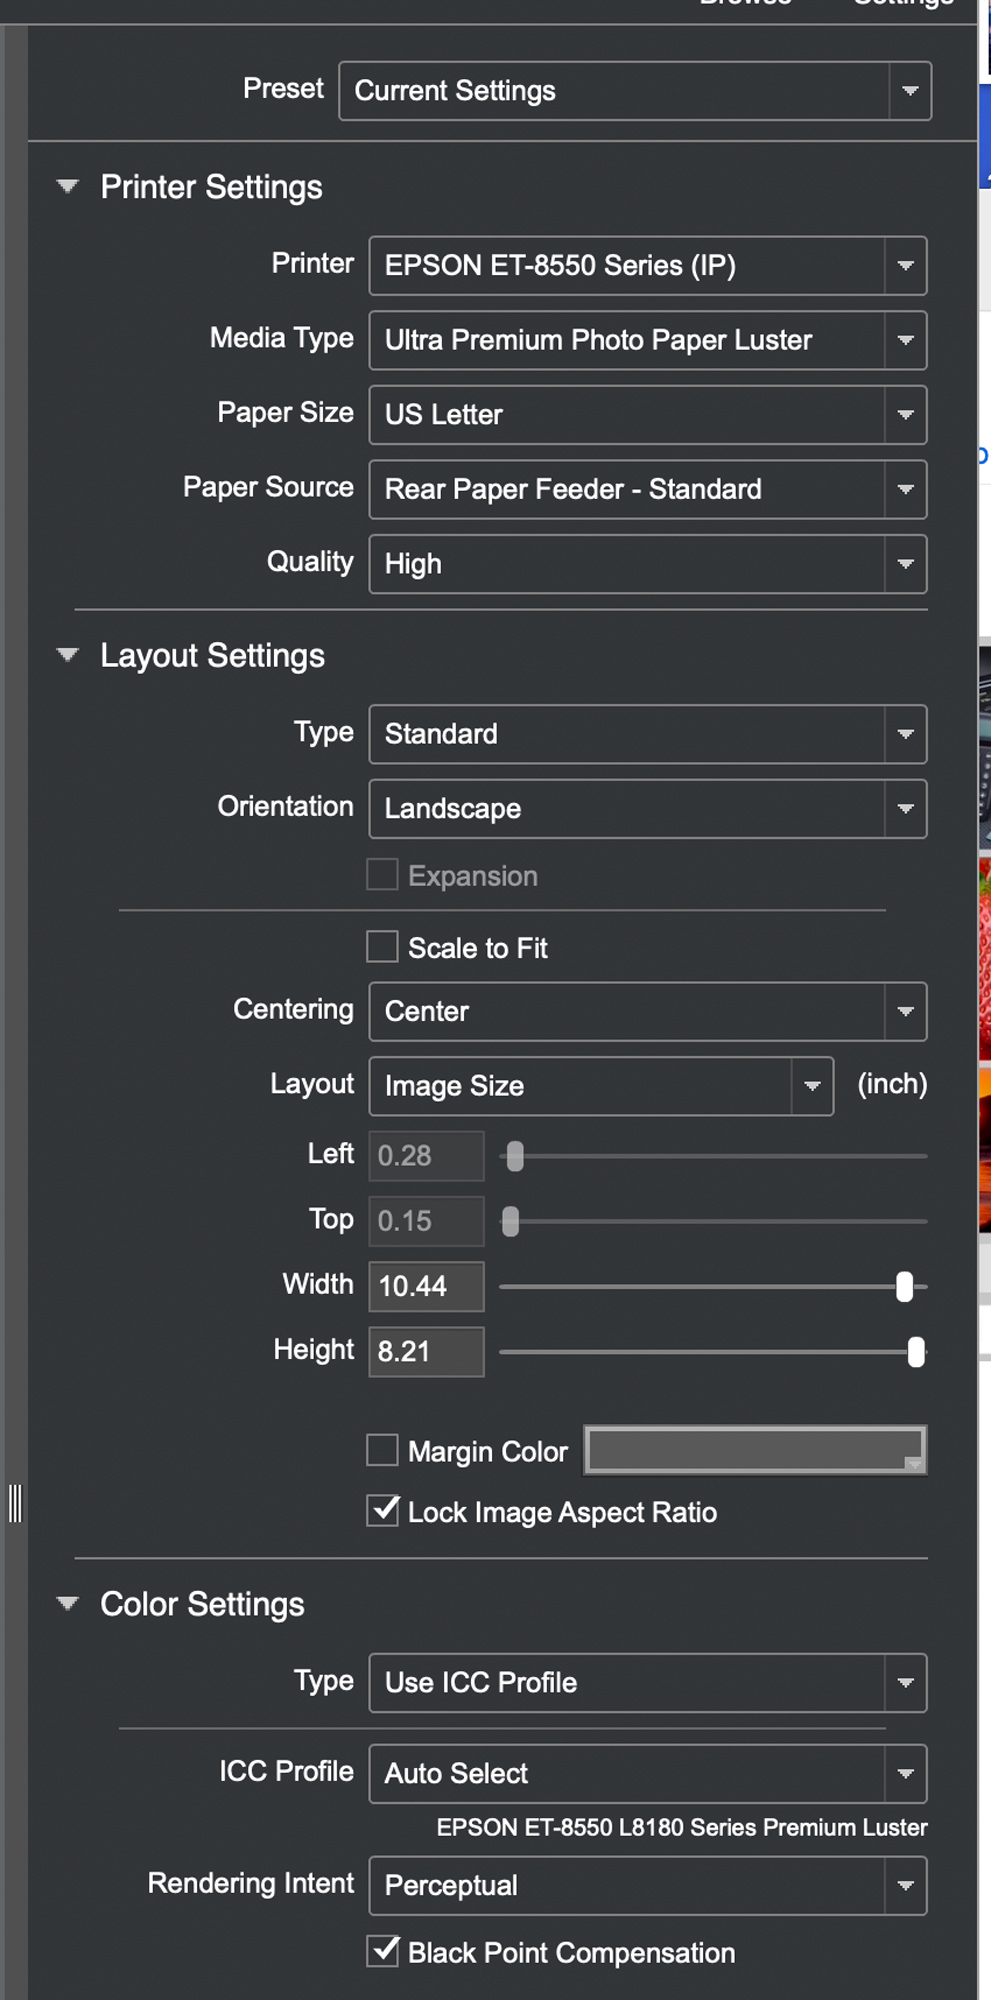 The Epson Print Layout settings